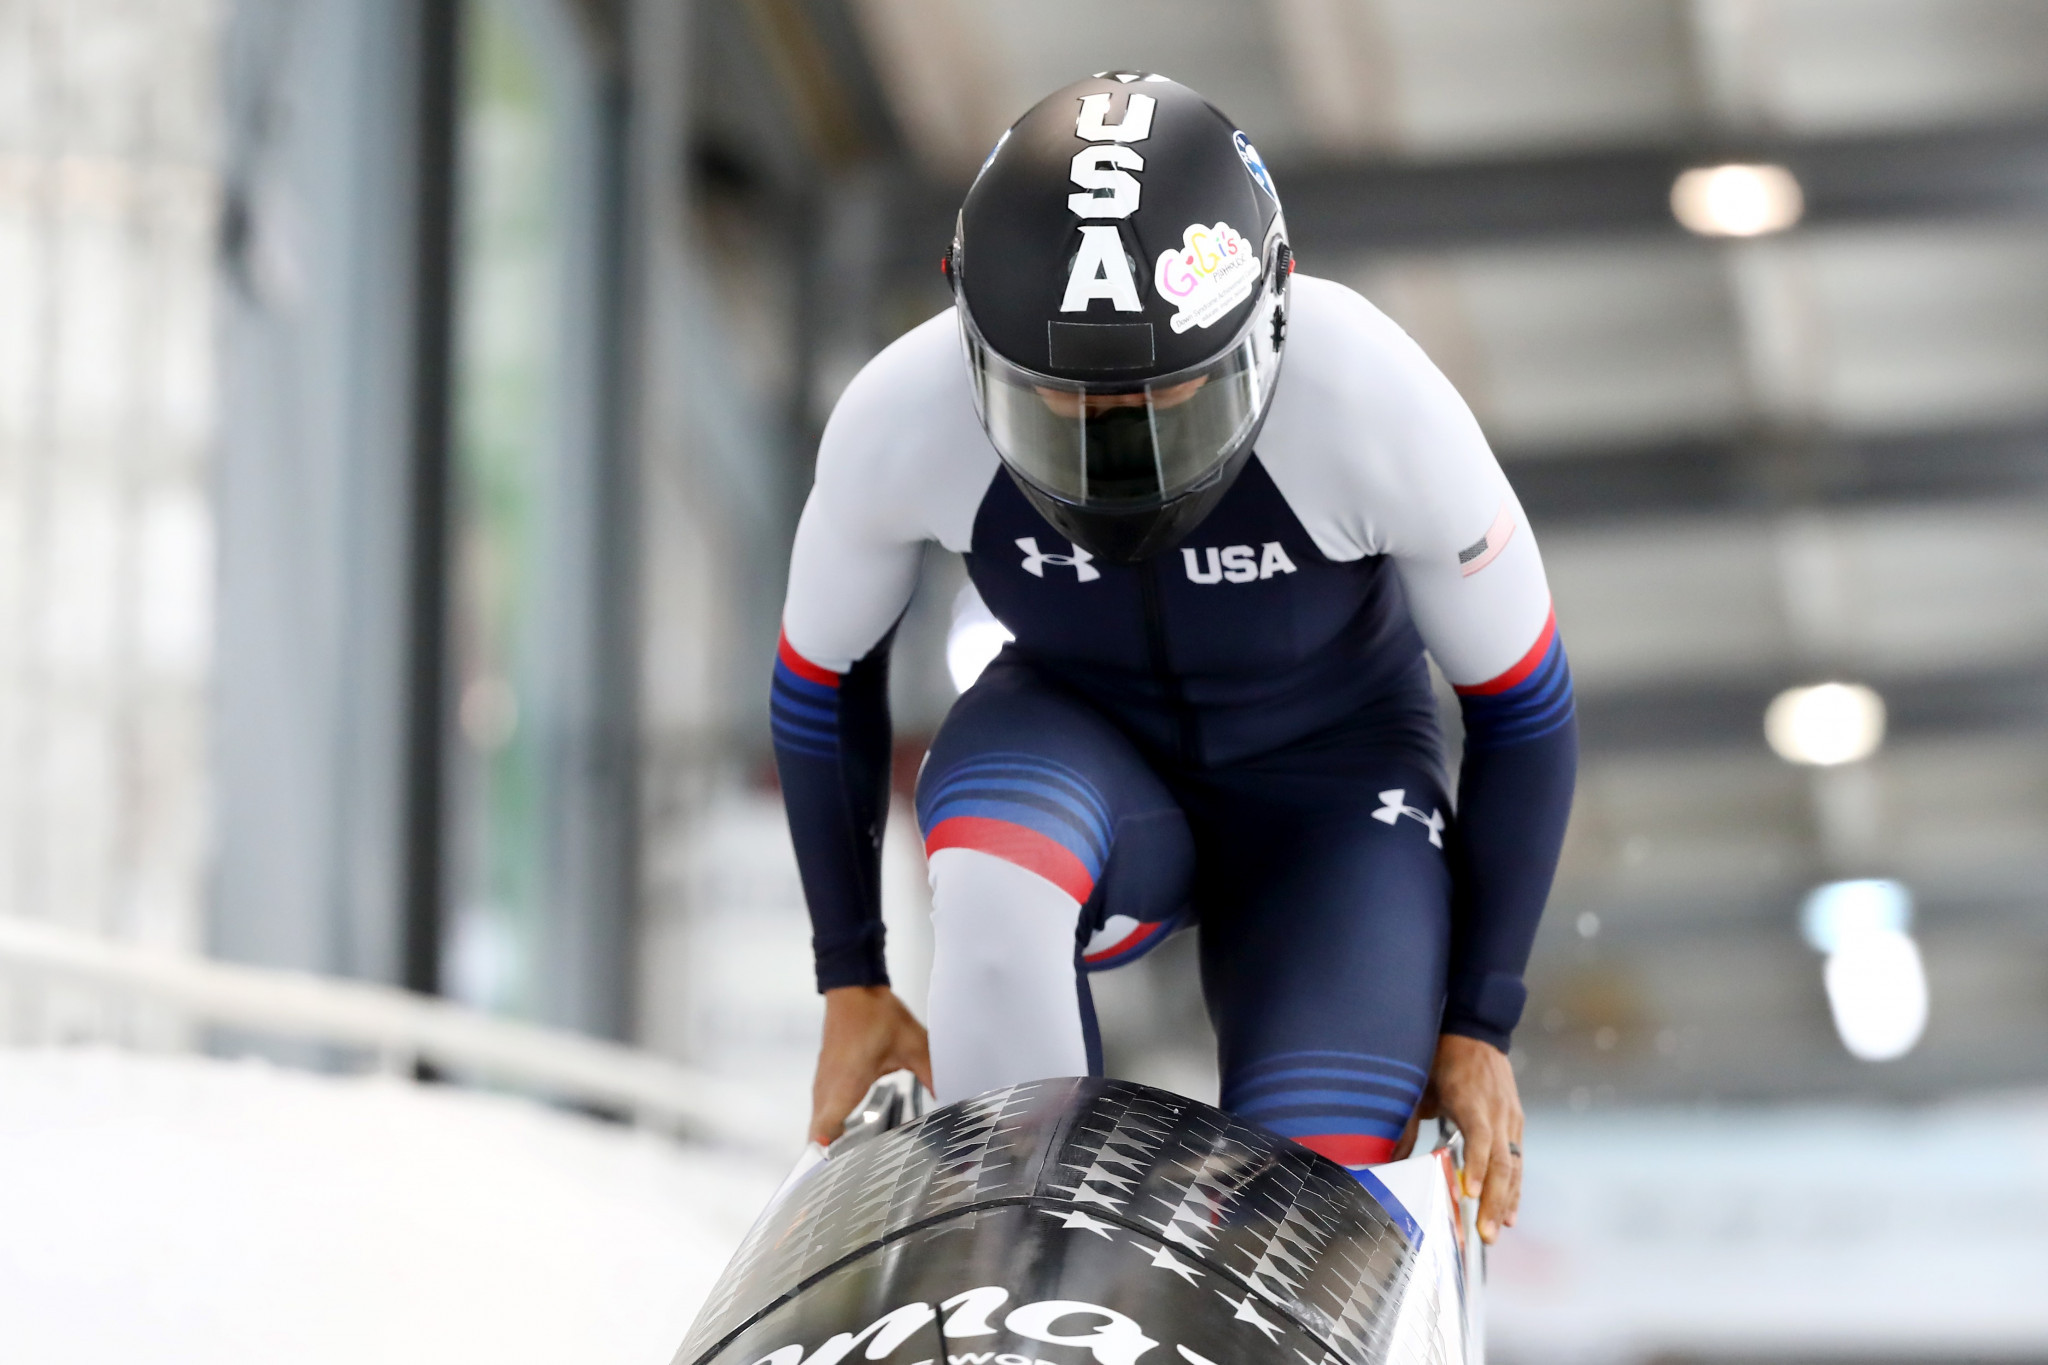 Meyers Taylor eyes historic monobob gold after COVID-hit Beijing 2022 build-up